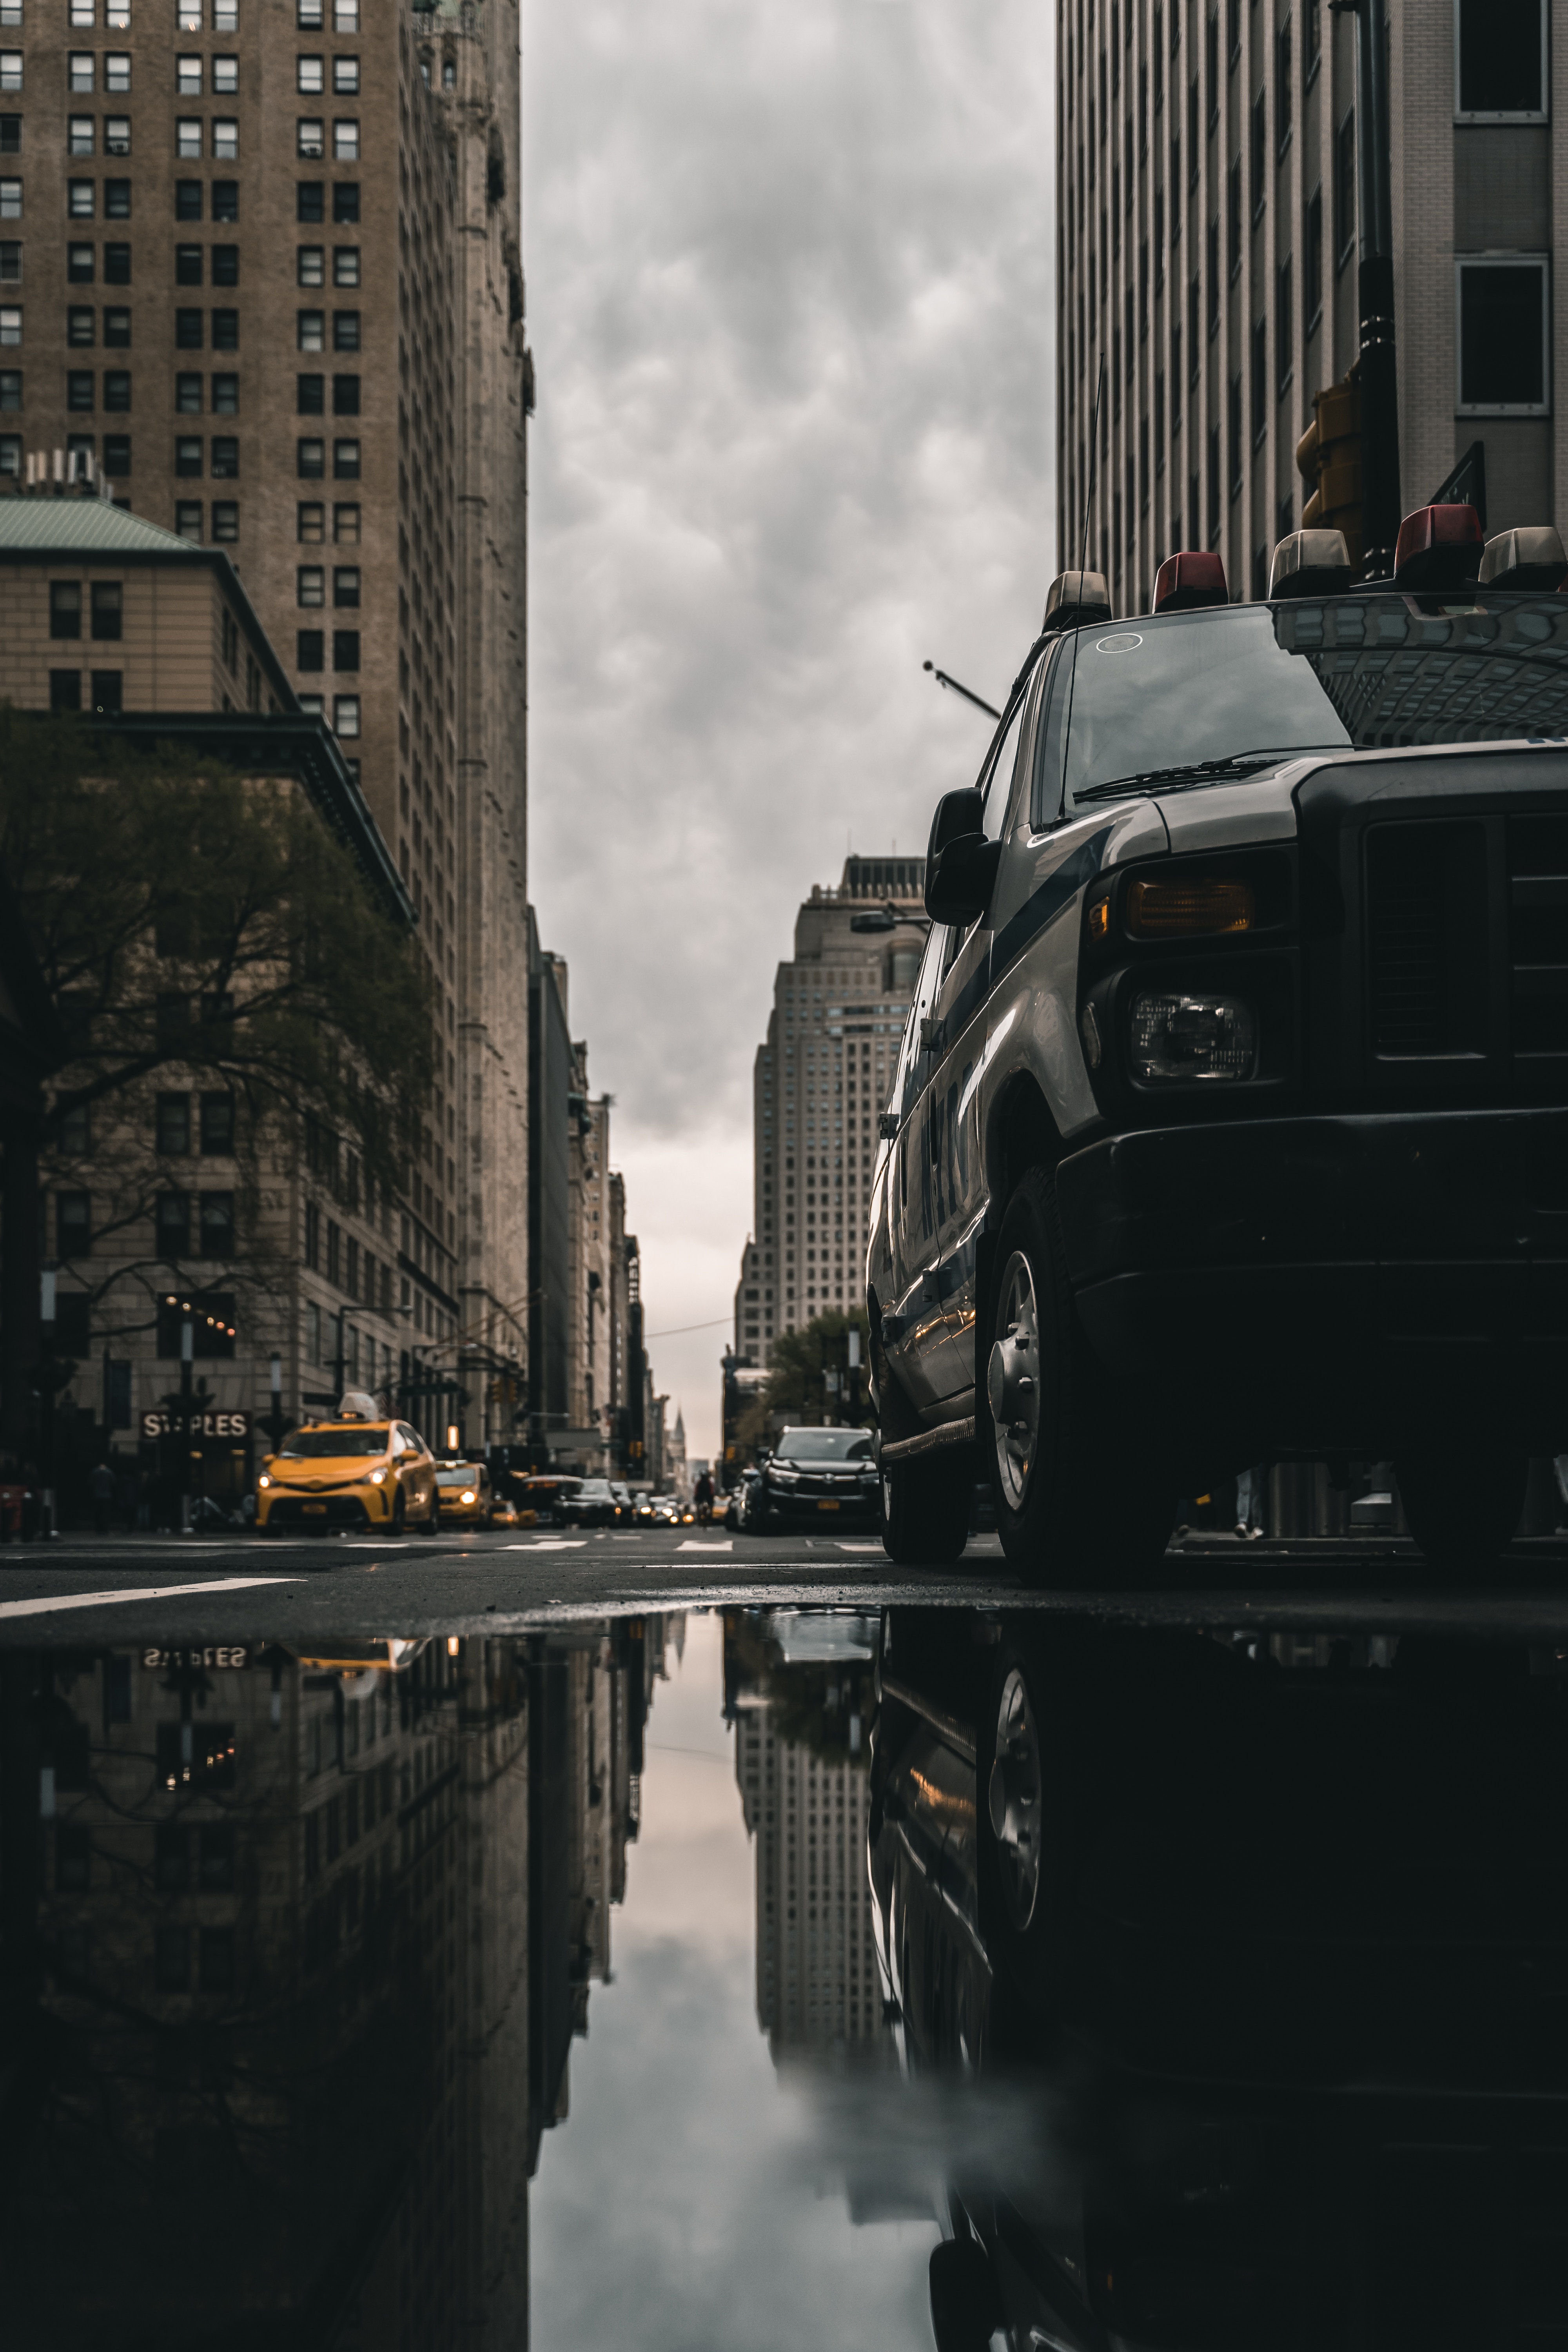 reflection, asphalt, street, cities, building, cars, puddle Full HD